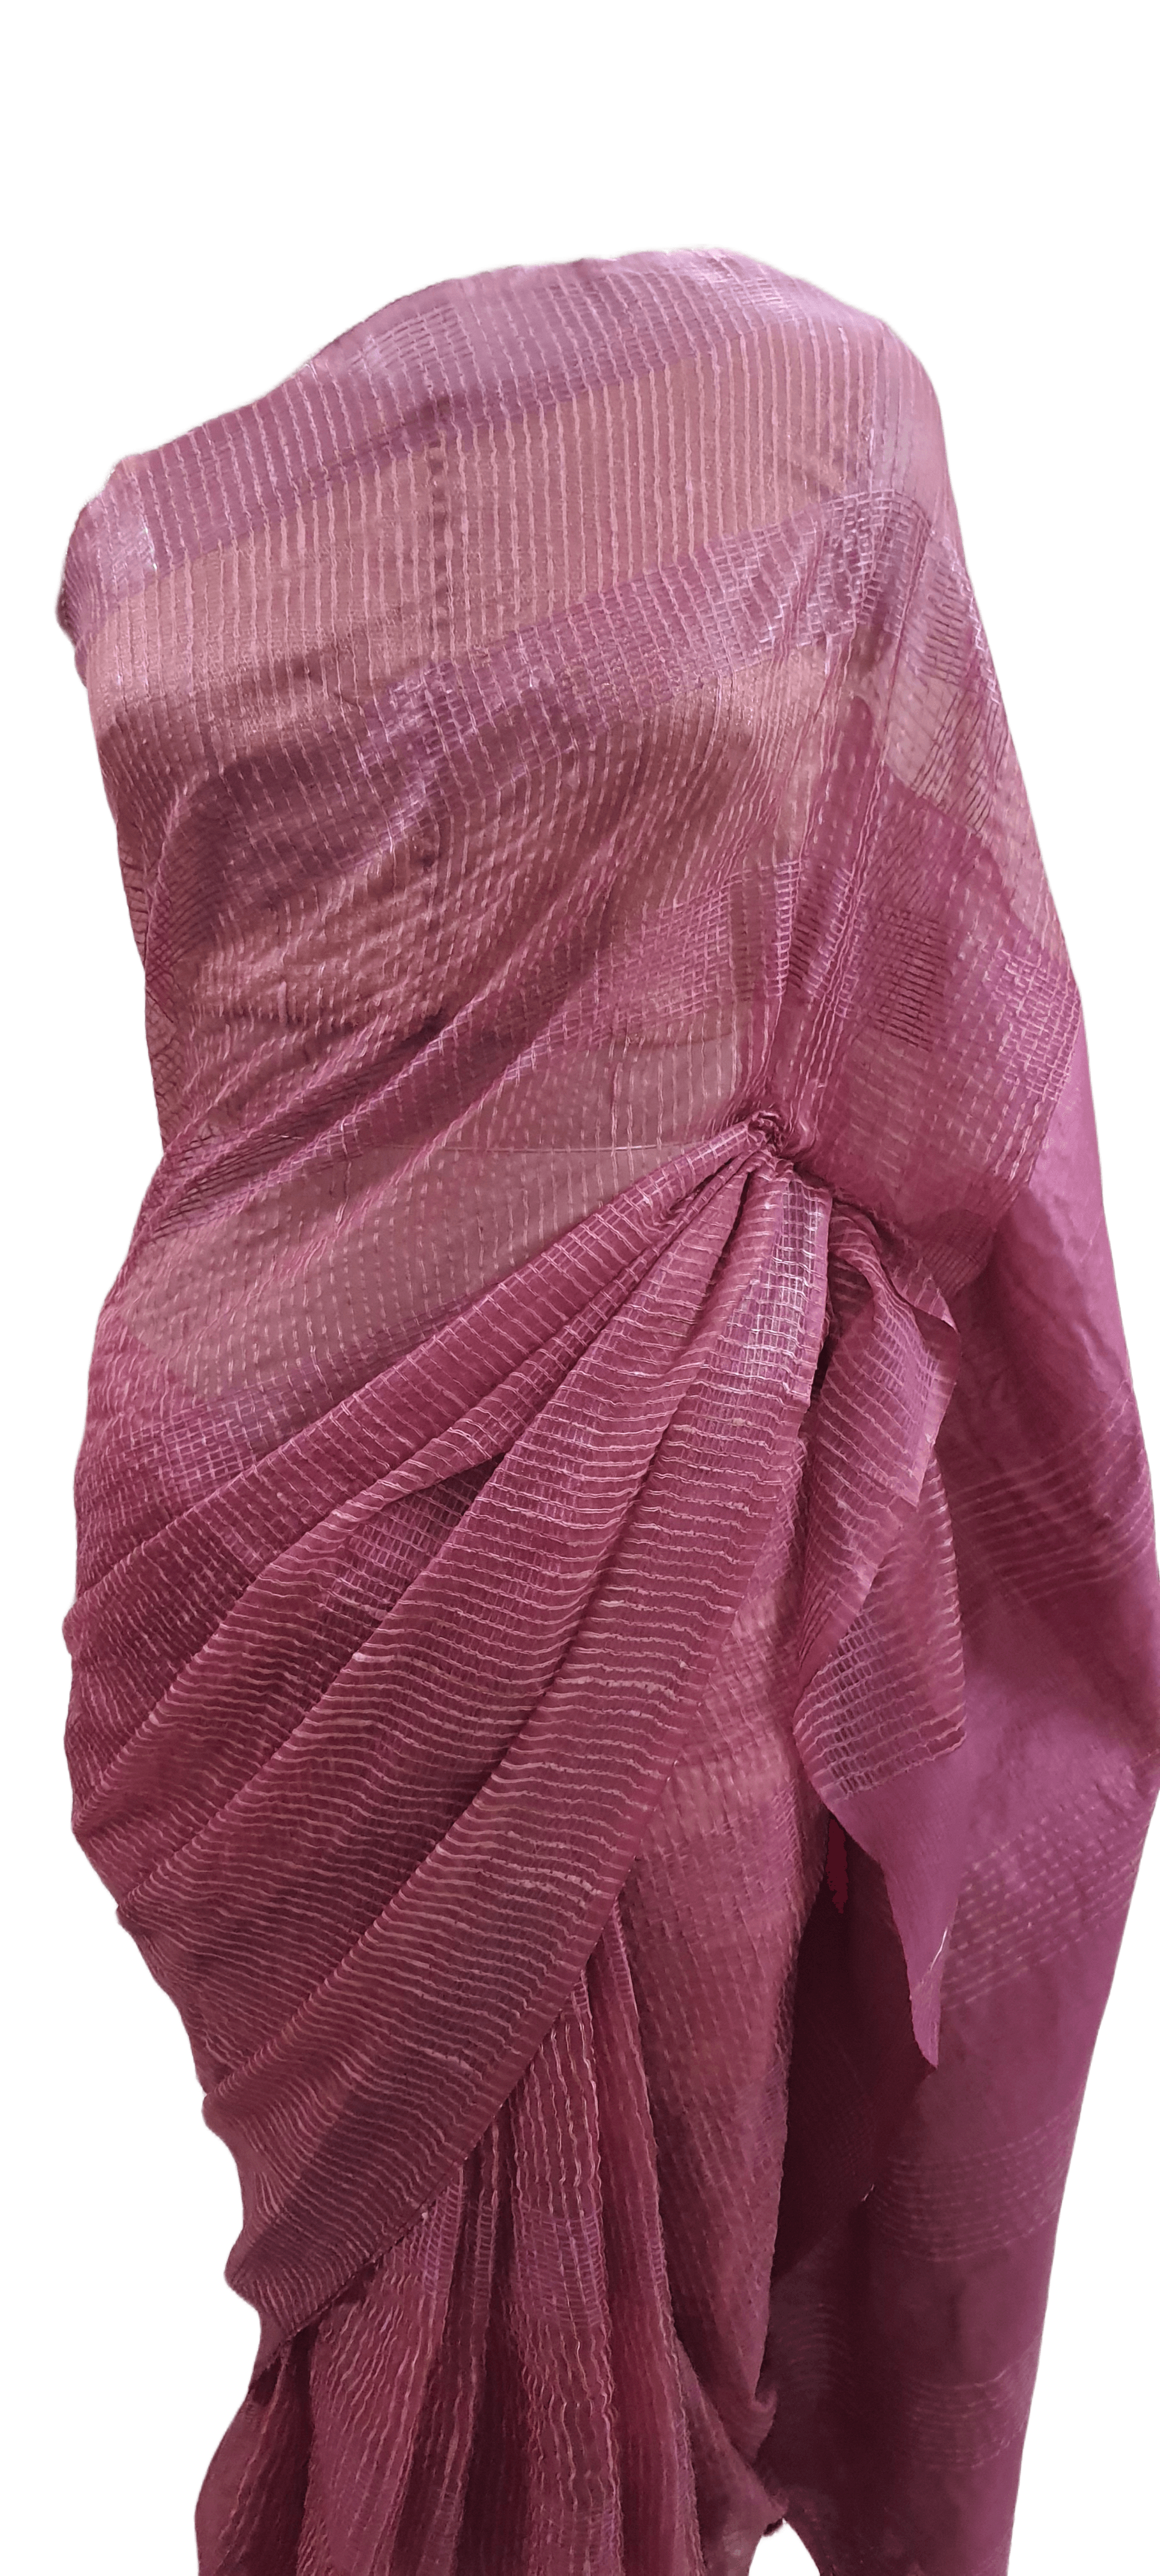 Onion Pink Katan Ghicha Saree with Pure Ikkat Cotton Blouse KG06 - Ethnic's By Anvi Creations